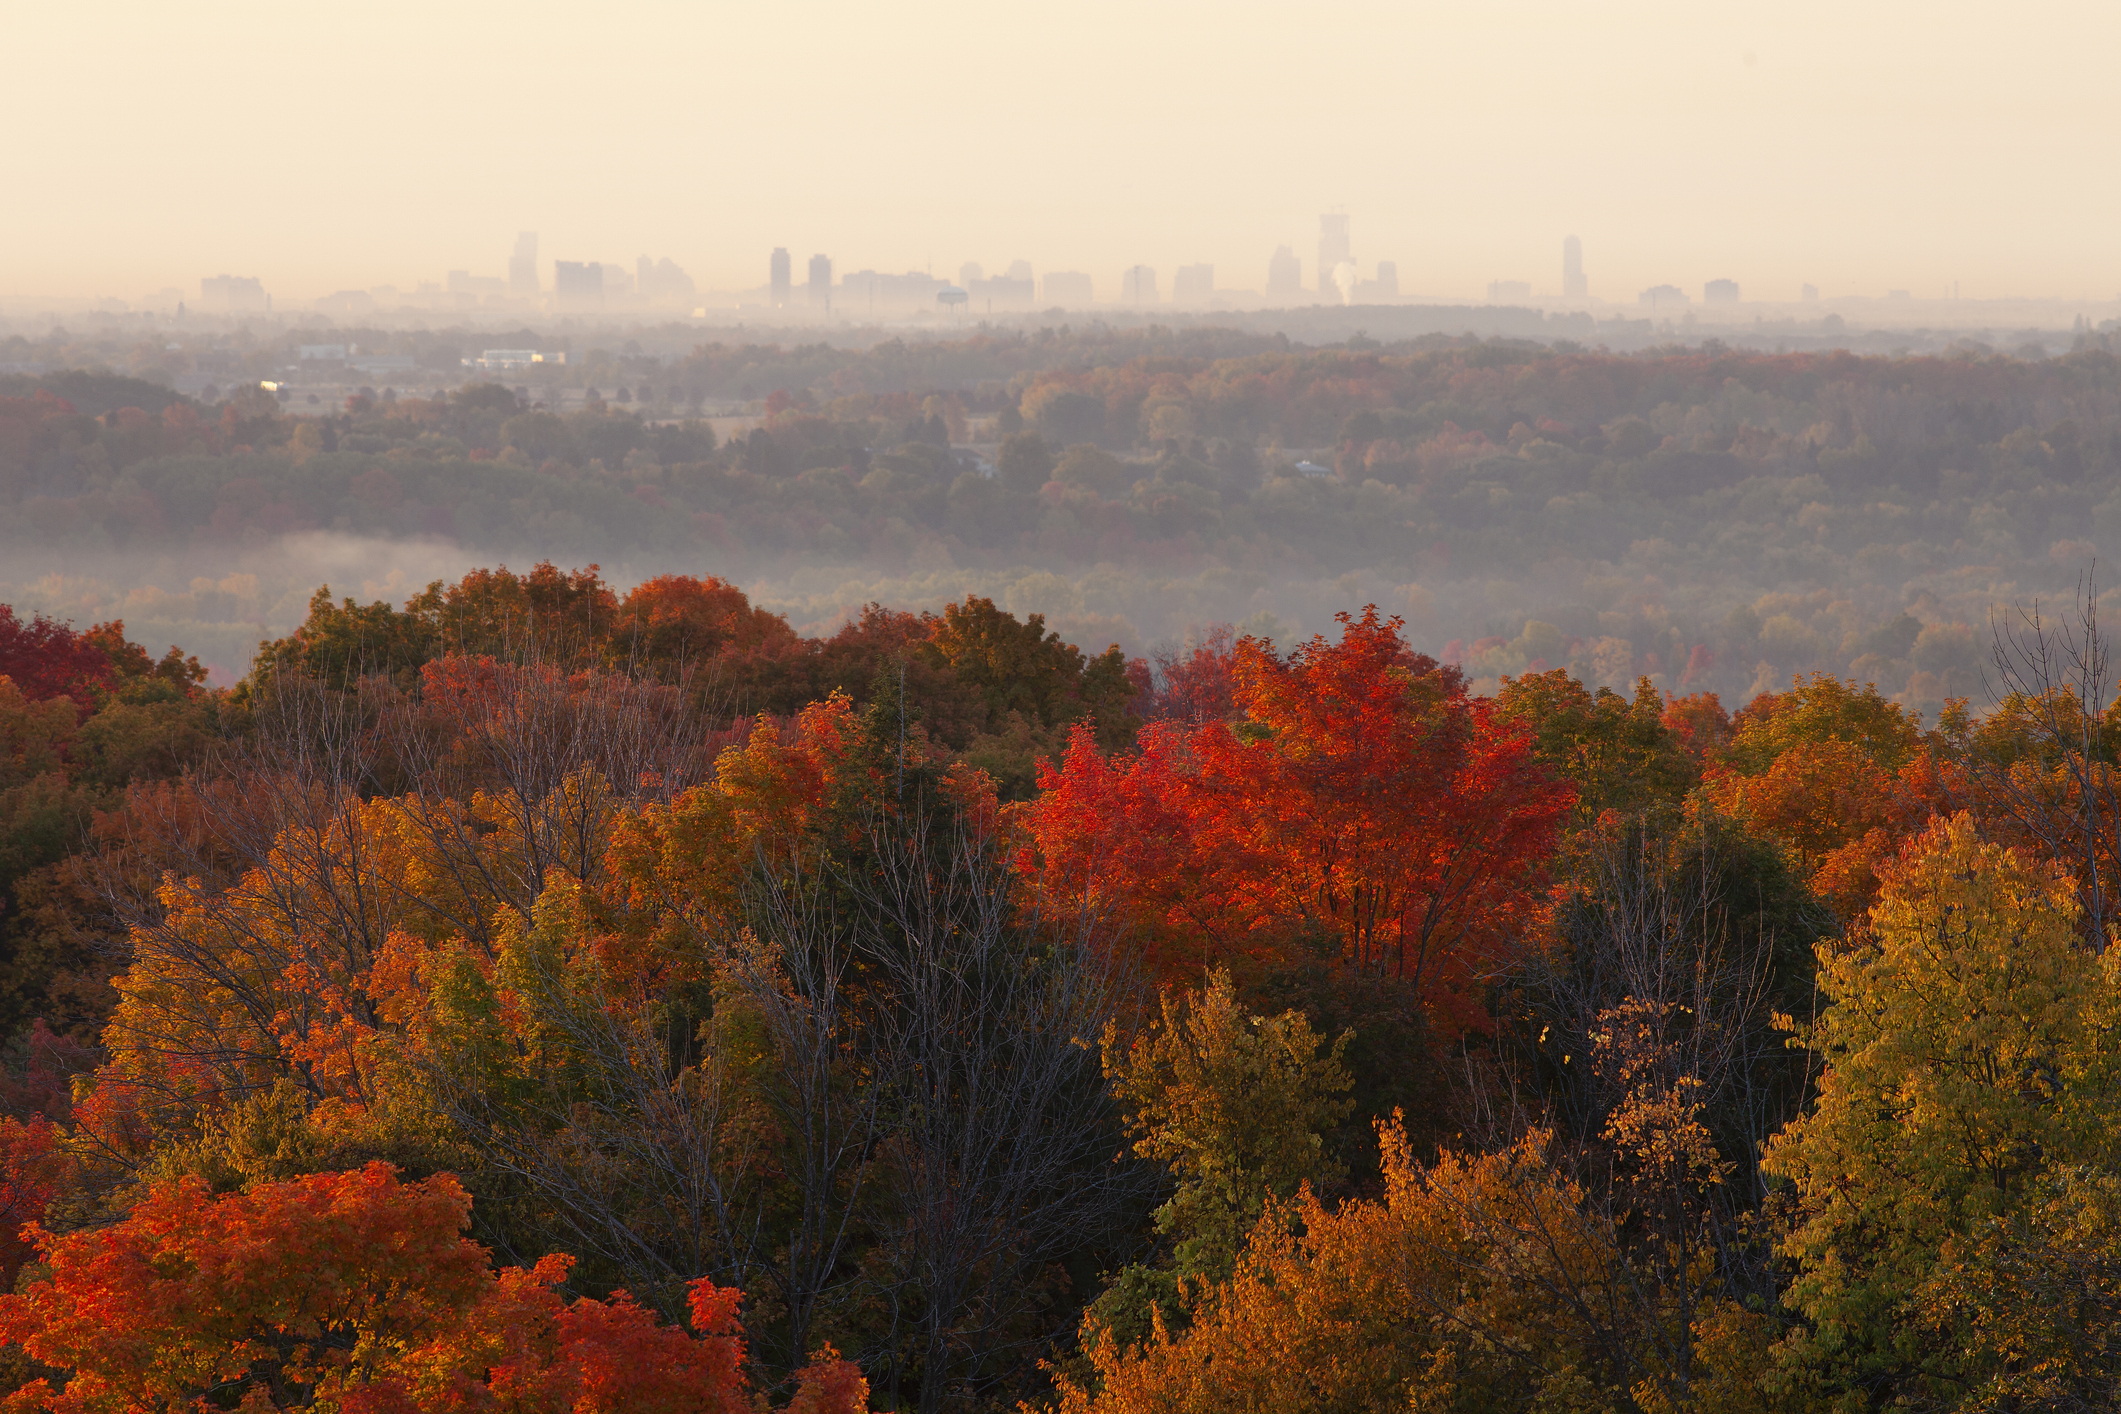 A city skyline in the distance with a foreground of dense autumn foliage